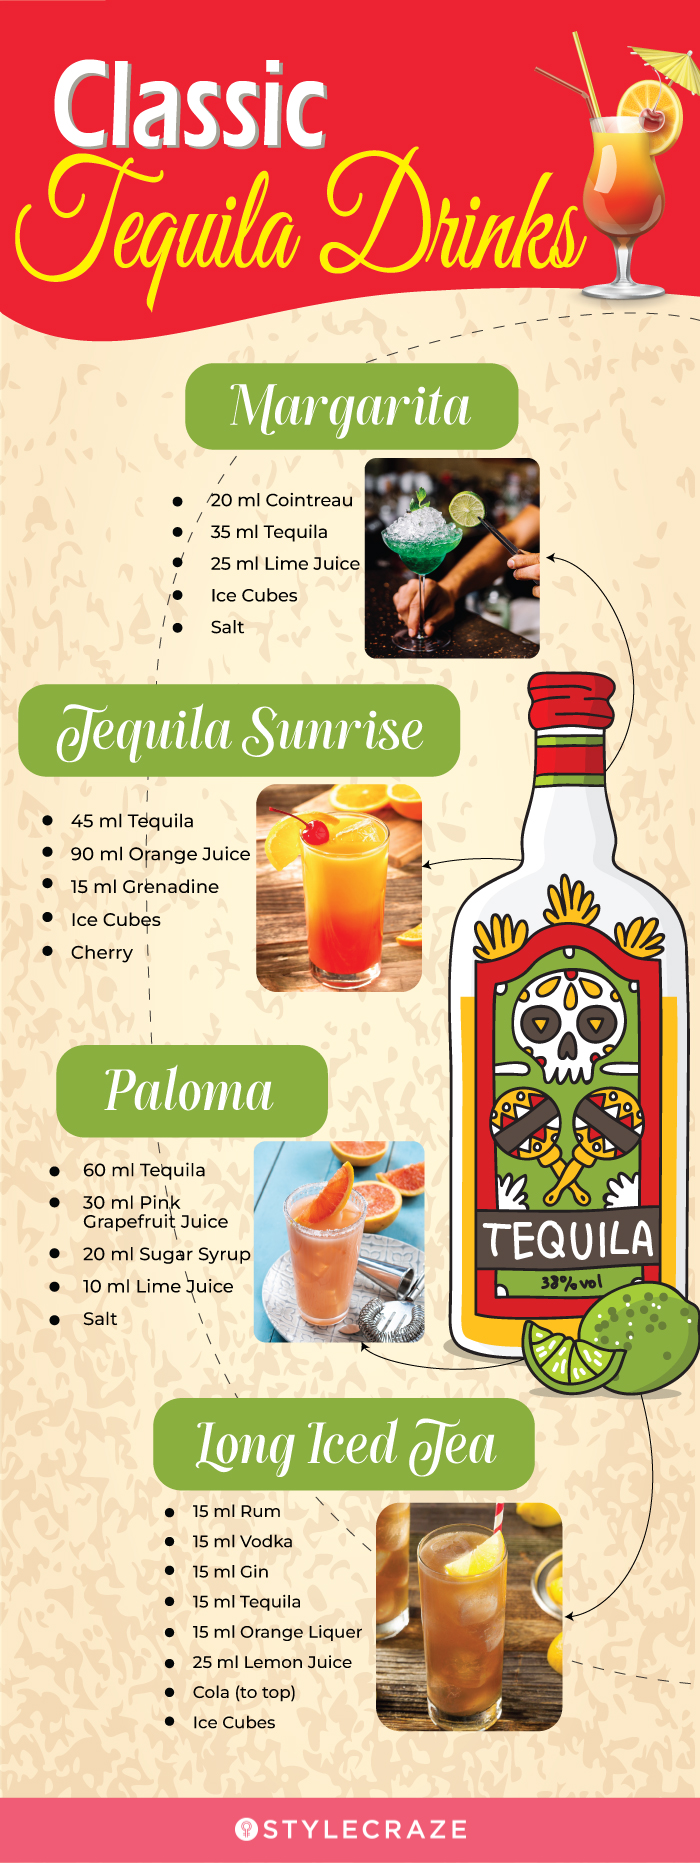 classic tequila drinks (infographic)